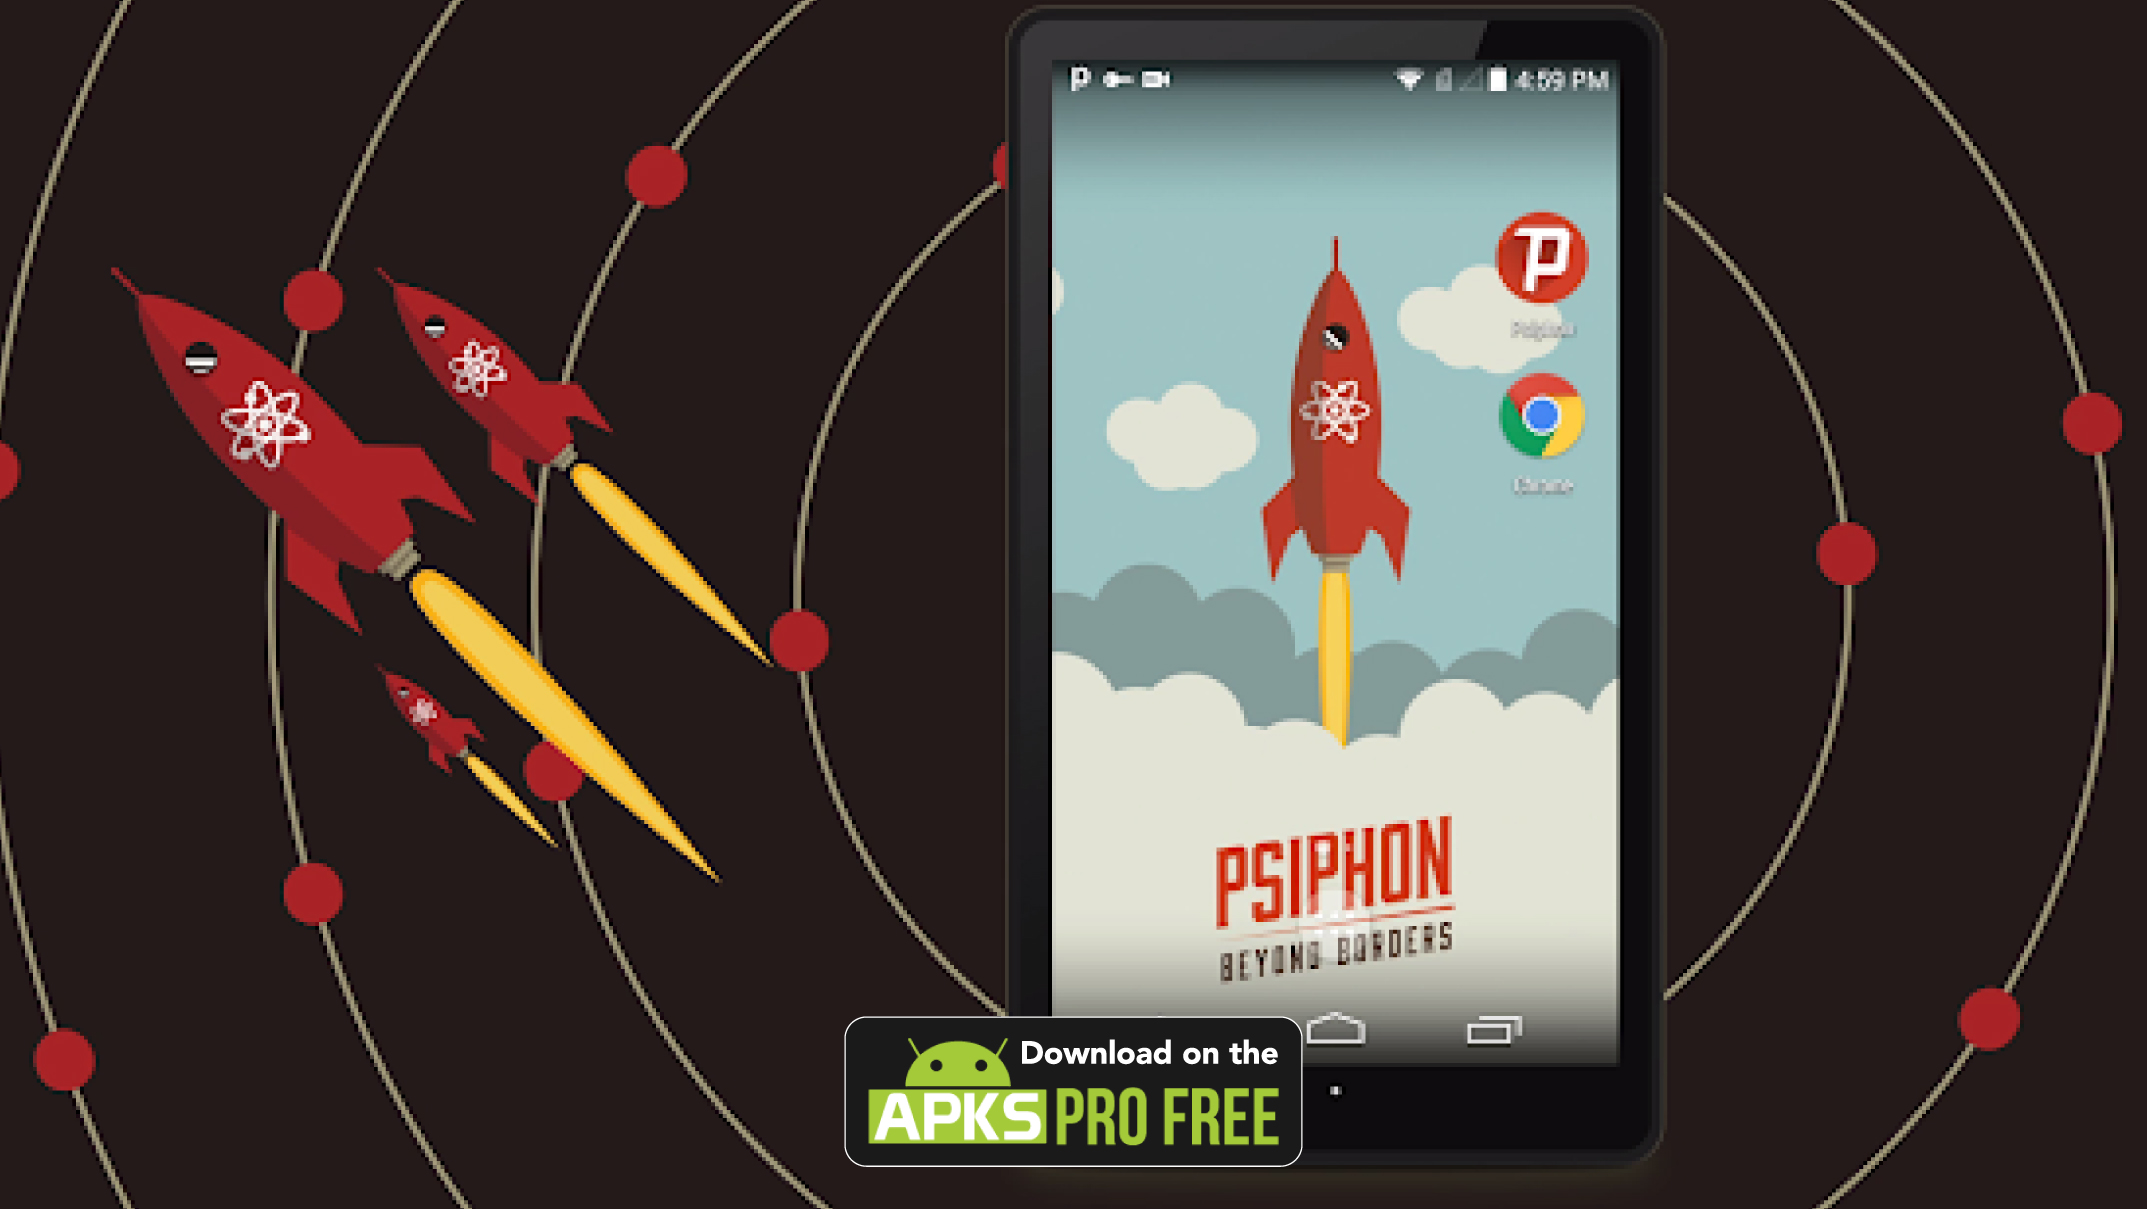 Psiphon PRO Latest MOD APK (Unlimited Speed/Subscribed)